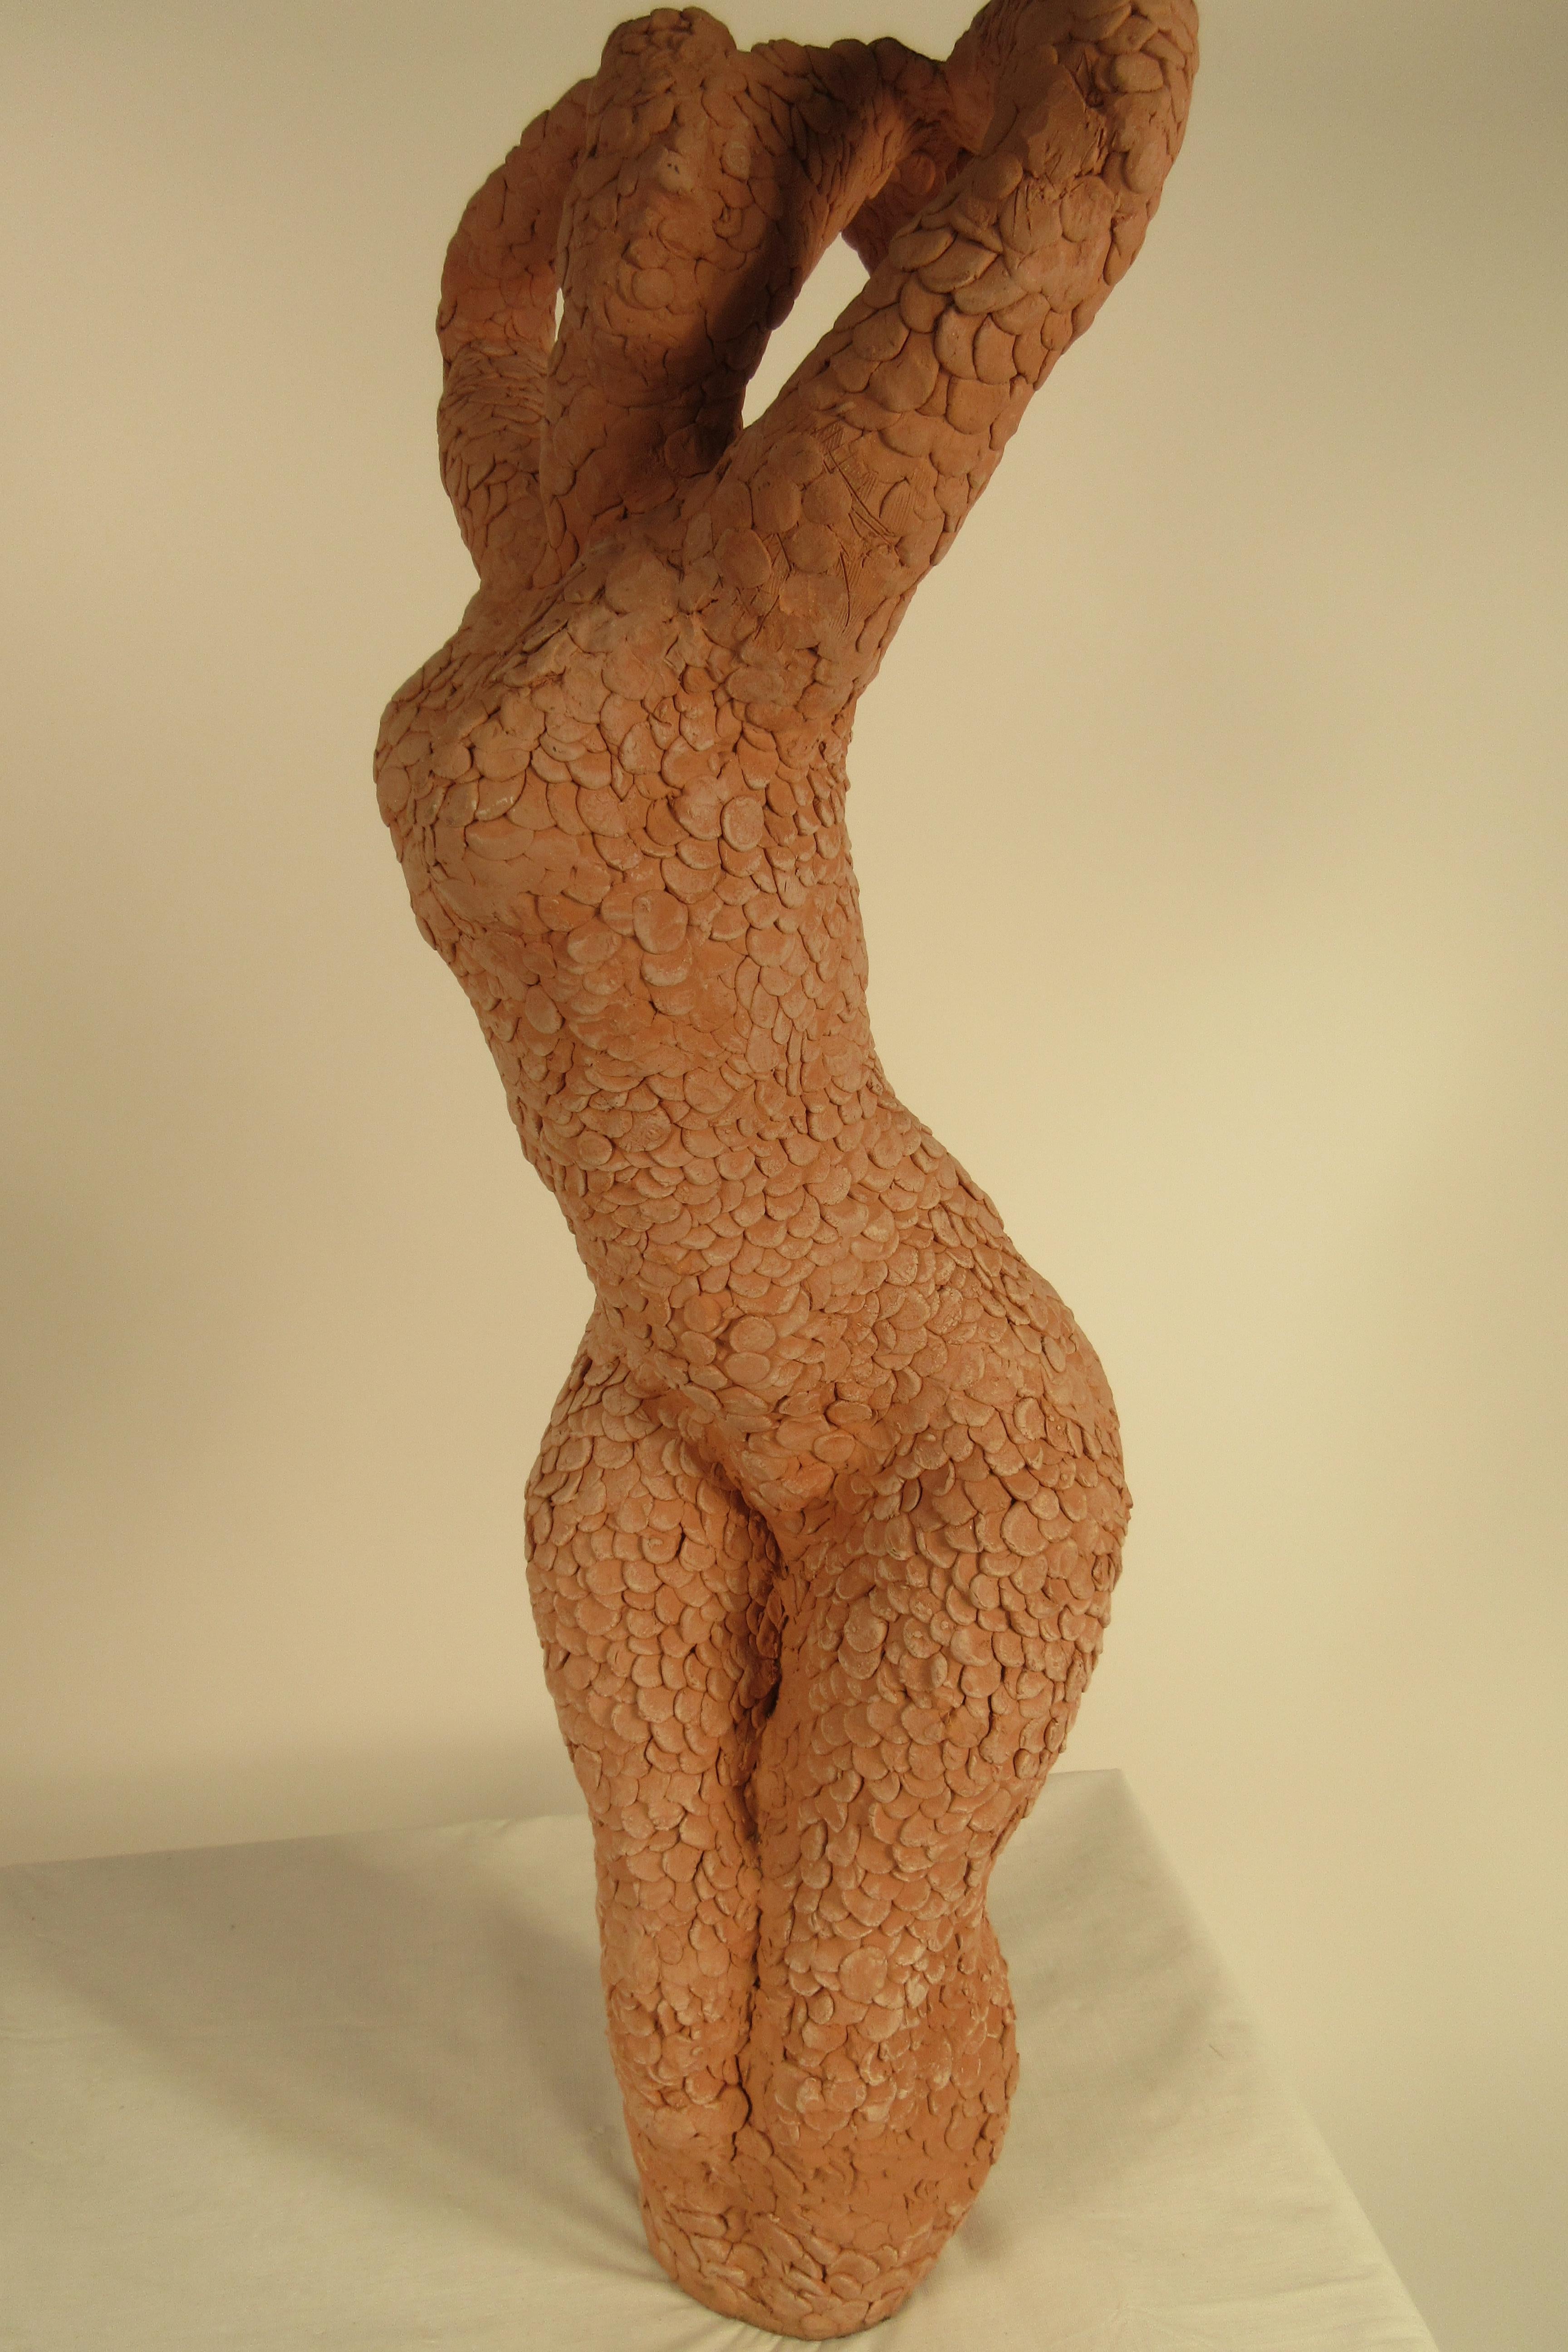 1960s Textured Clay Sculpture of Nude Woman 4